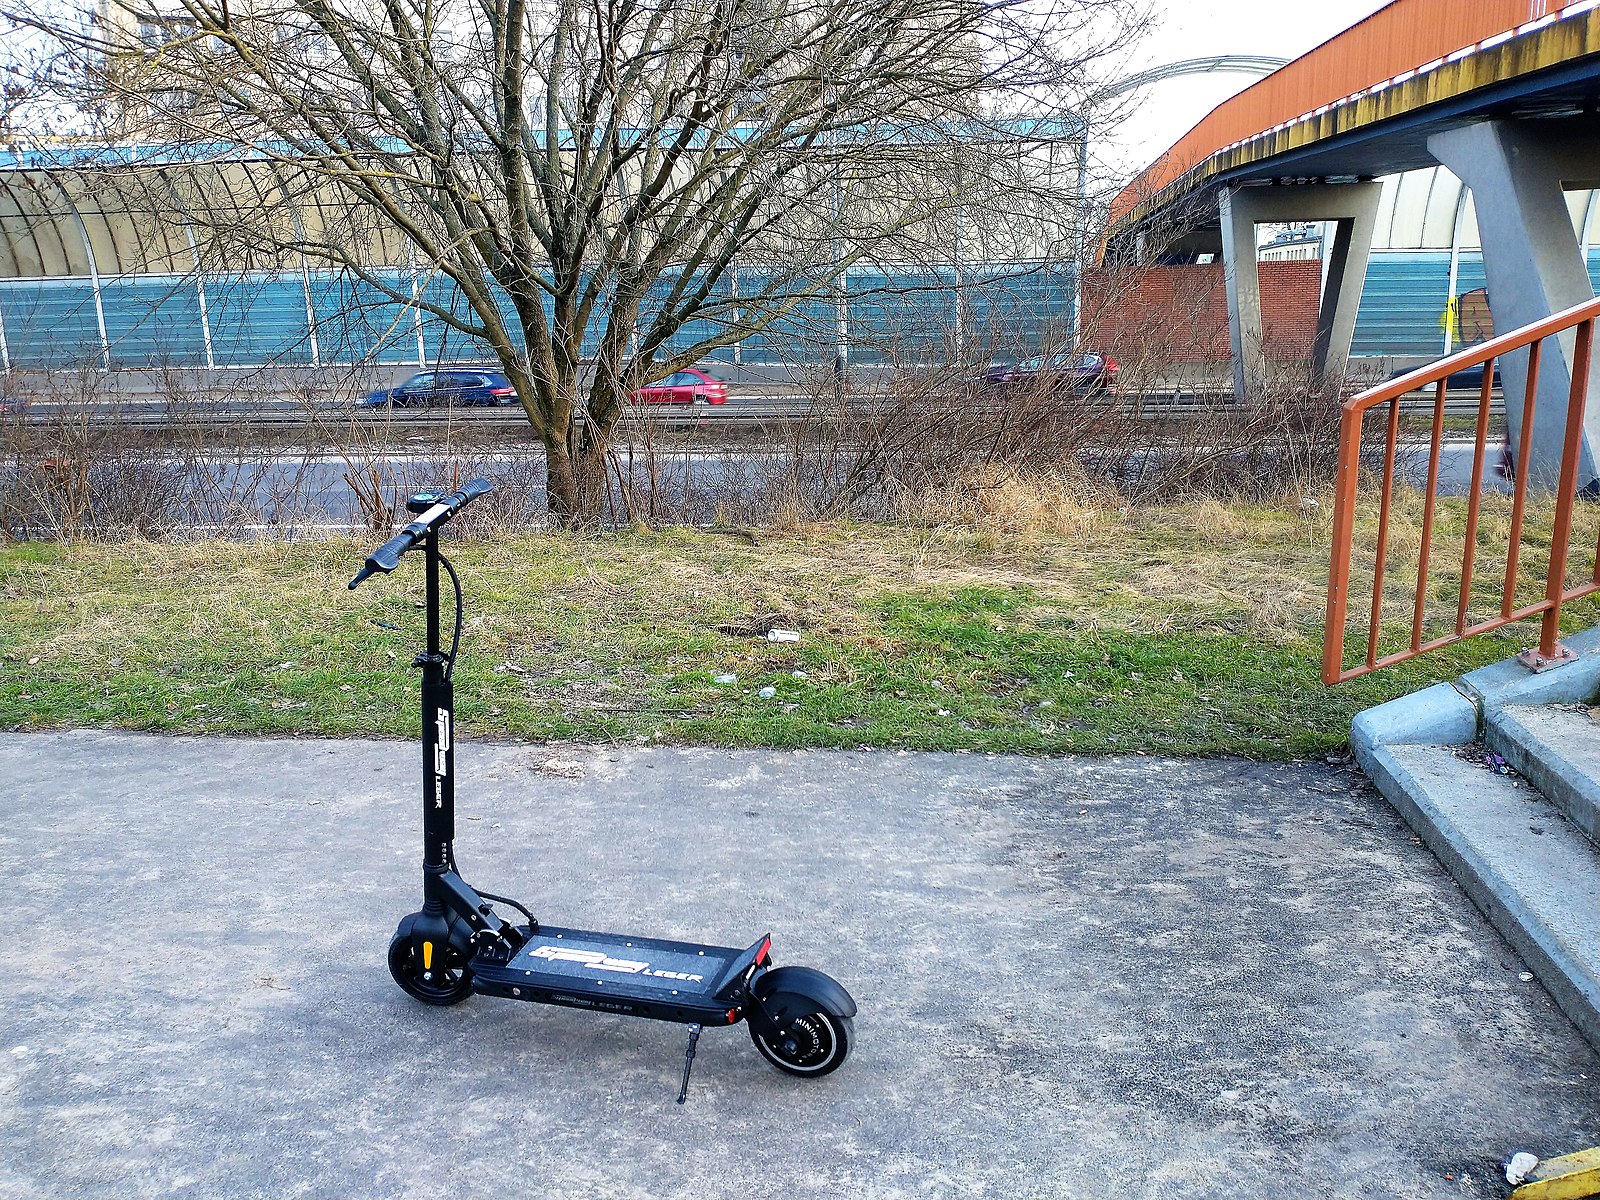 solar powered scooter, solar scooter, solar travel